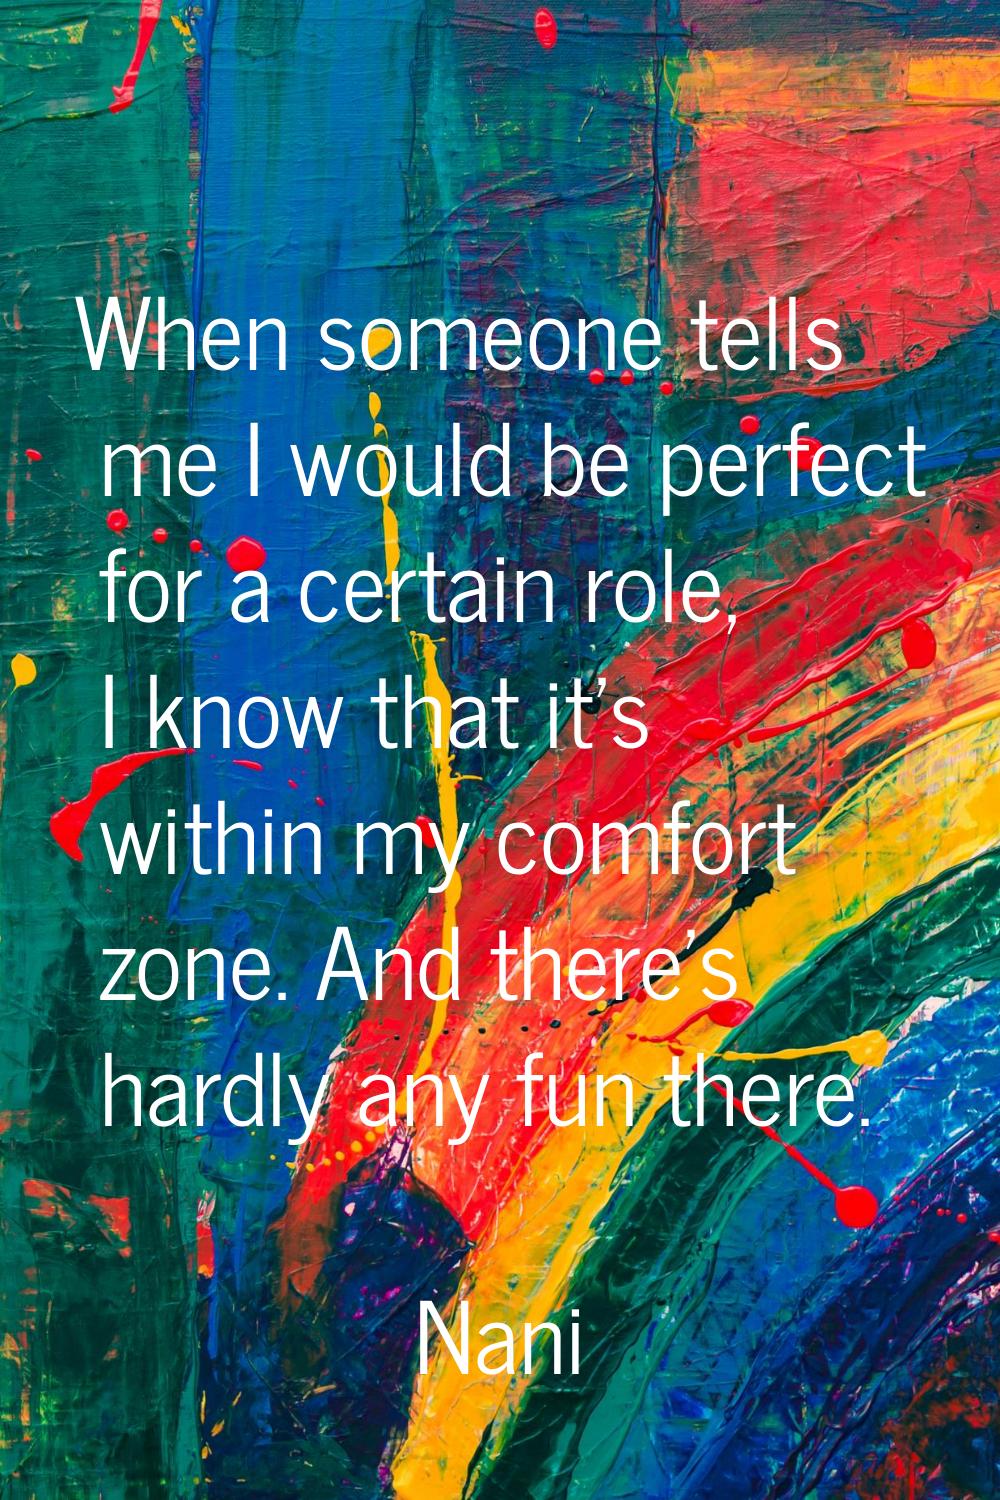 When someone tells me I would be perfect for a certain role, I know that it's within my comfort zon